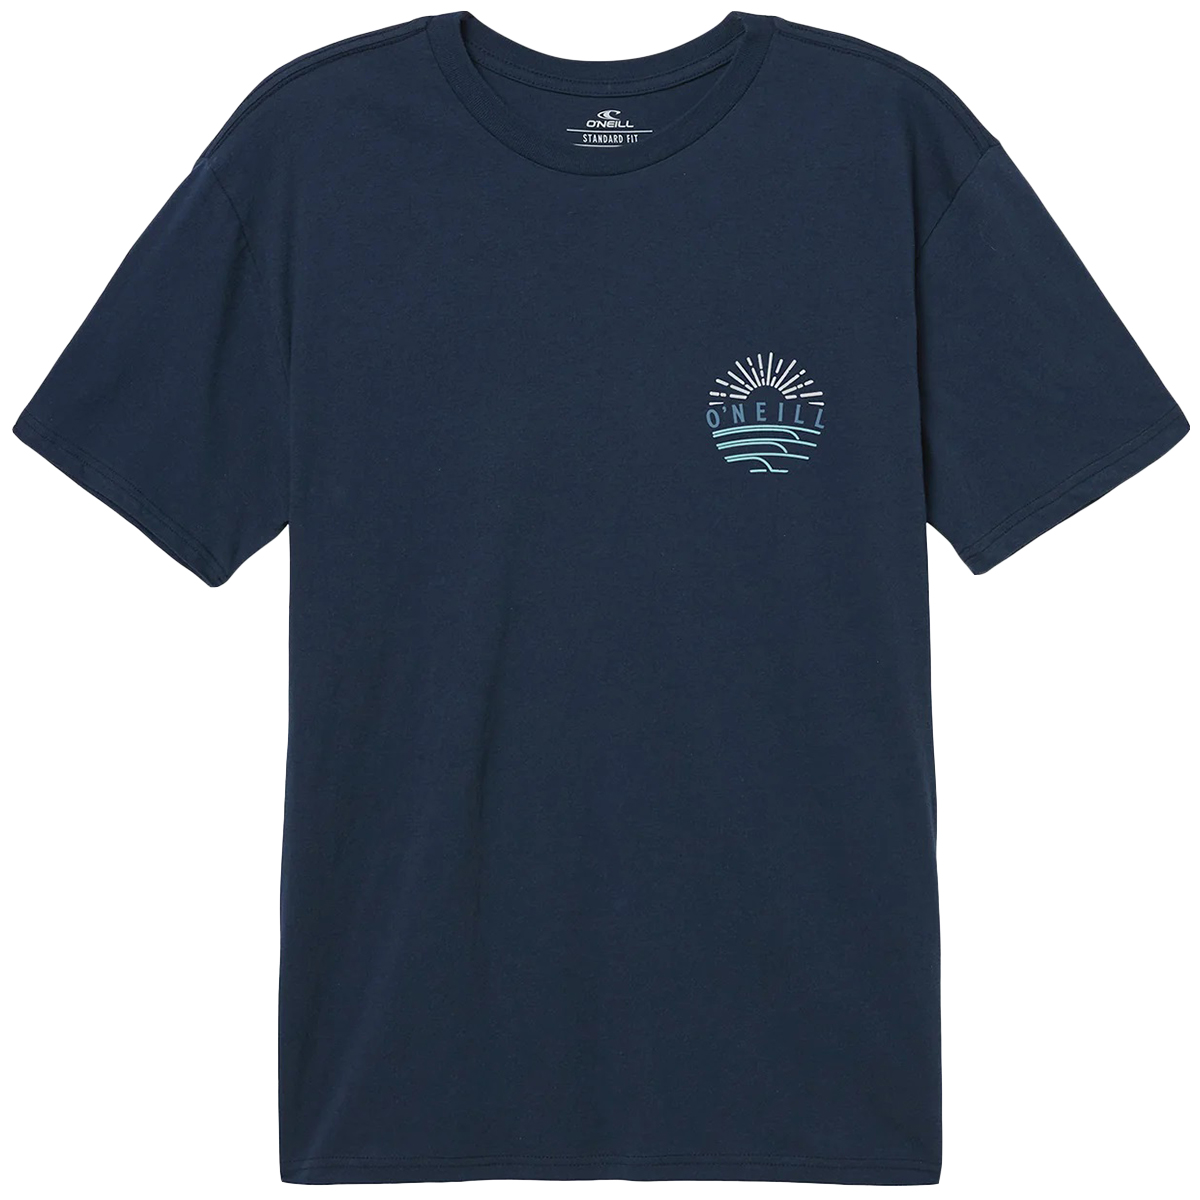 O'neill Young Men's Short-Sleeve Sound & Fury Tee